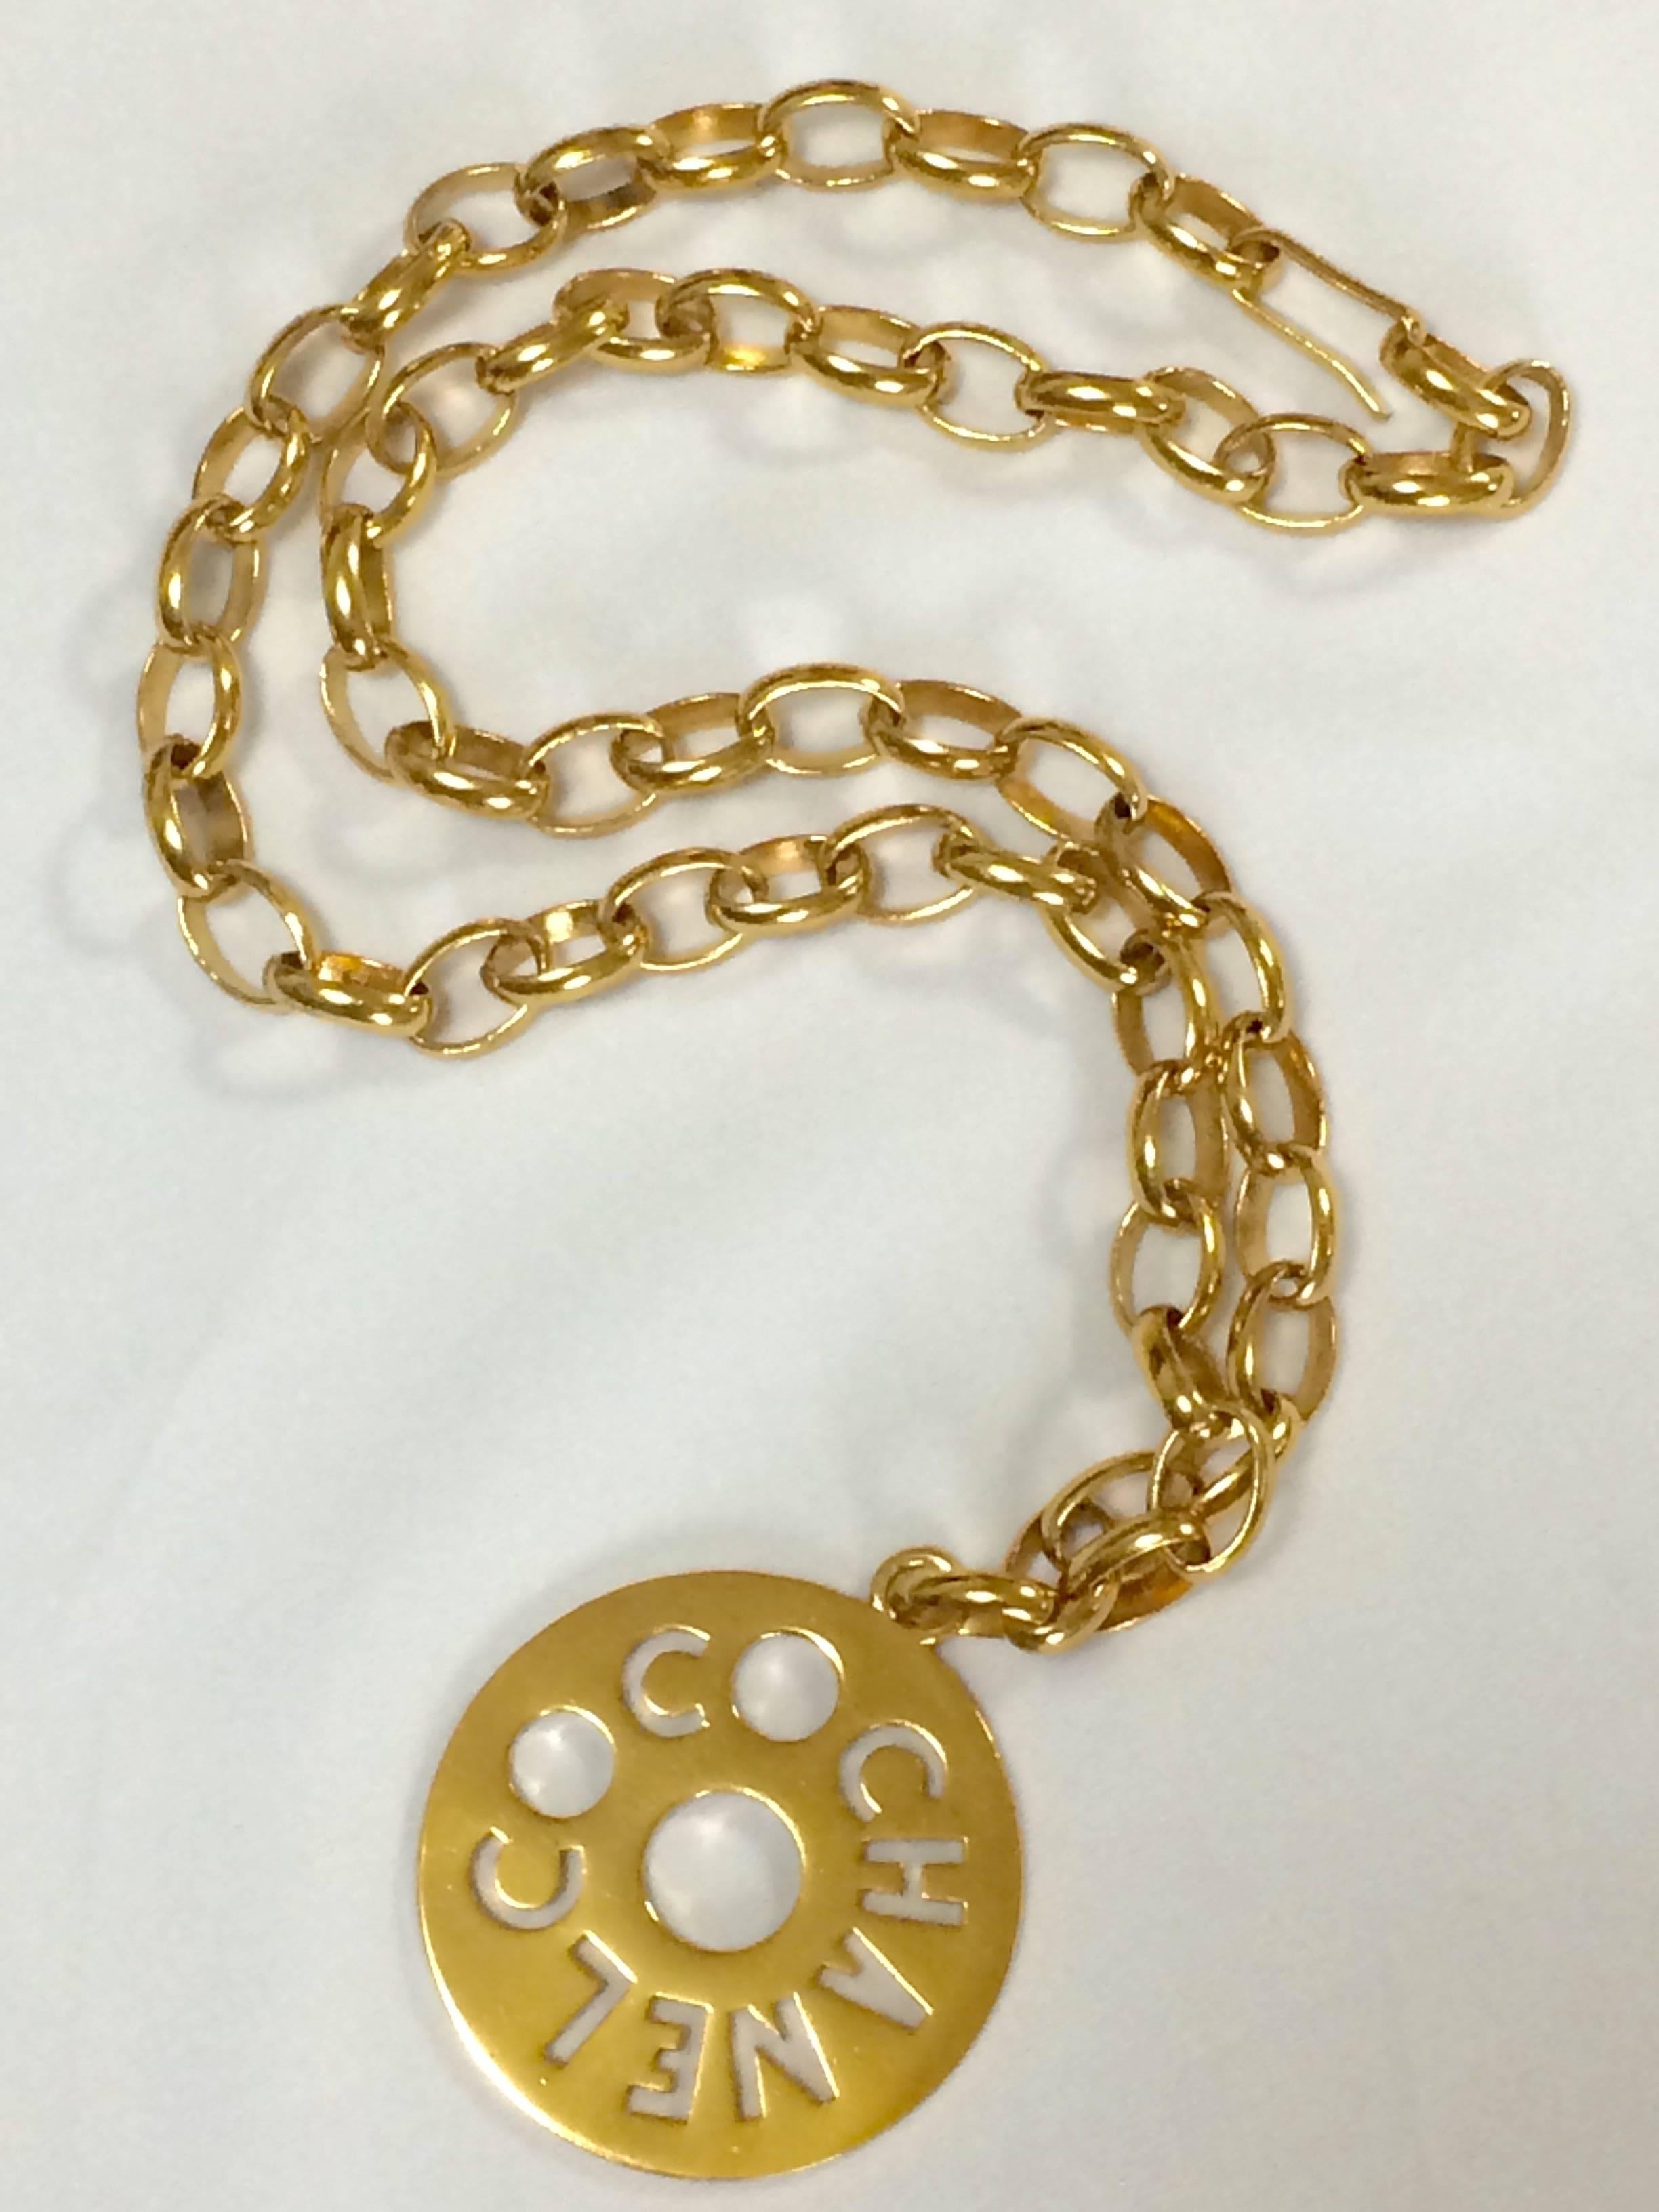 Women's Vintage CHANEL golden chain necklace, chain belt with round logo COCO top.